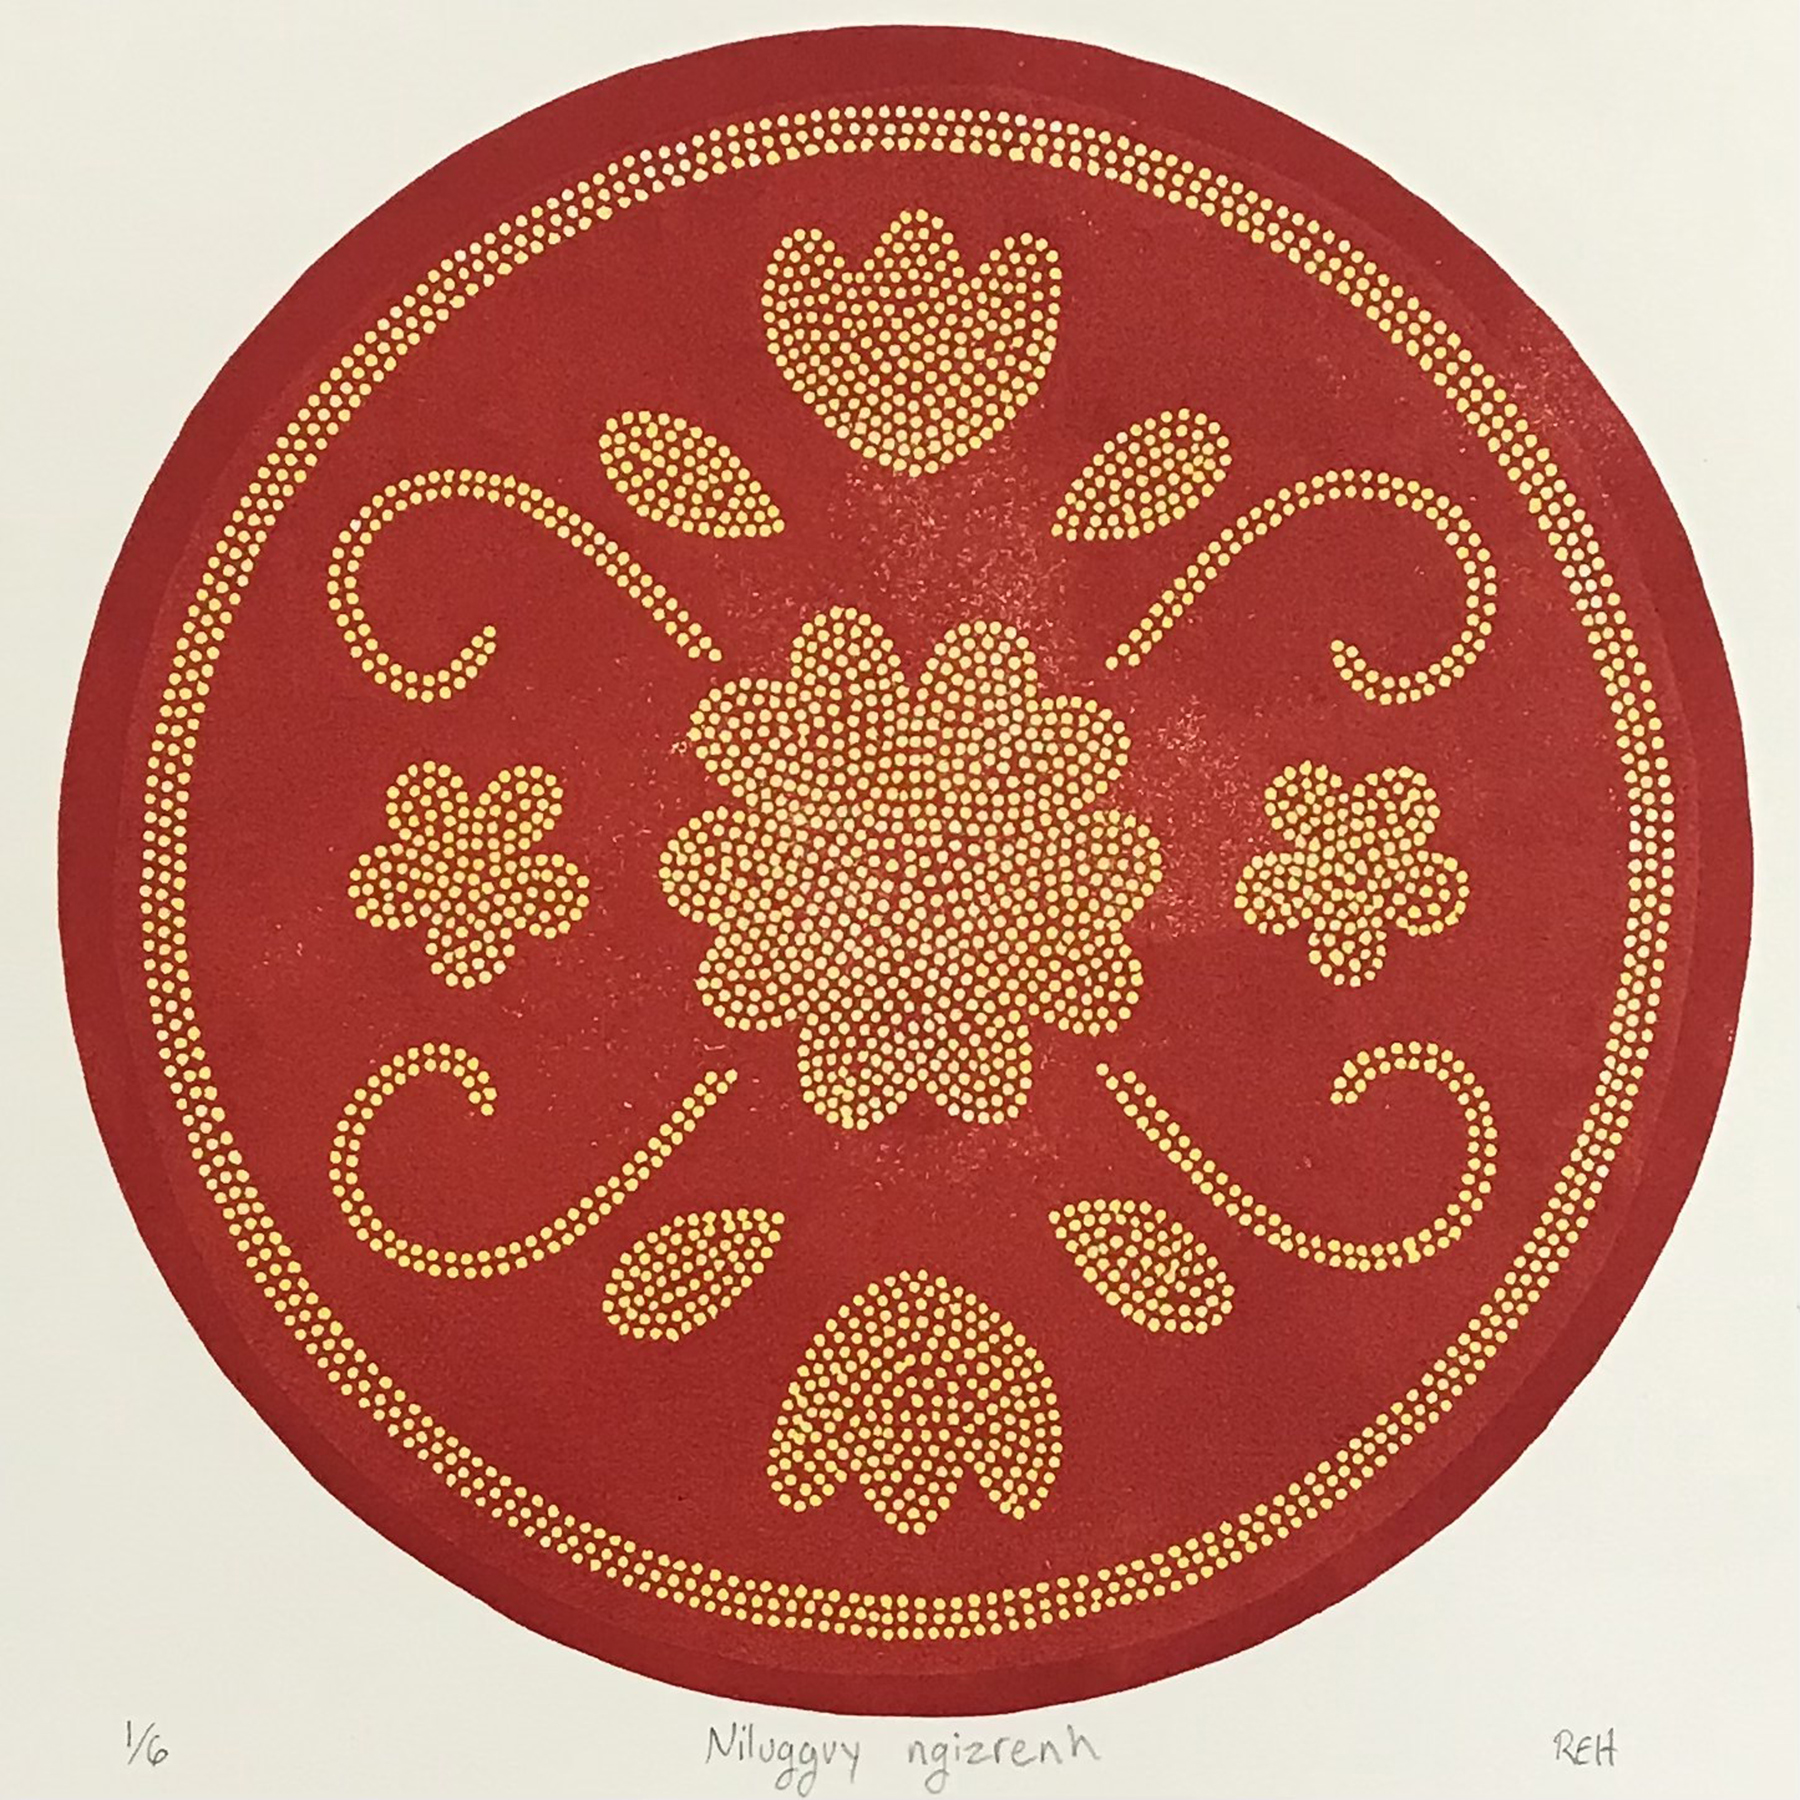 A red circular crest with small yellow dots creating an intricate pattern inside, courtesy of the artist